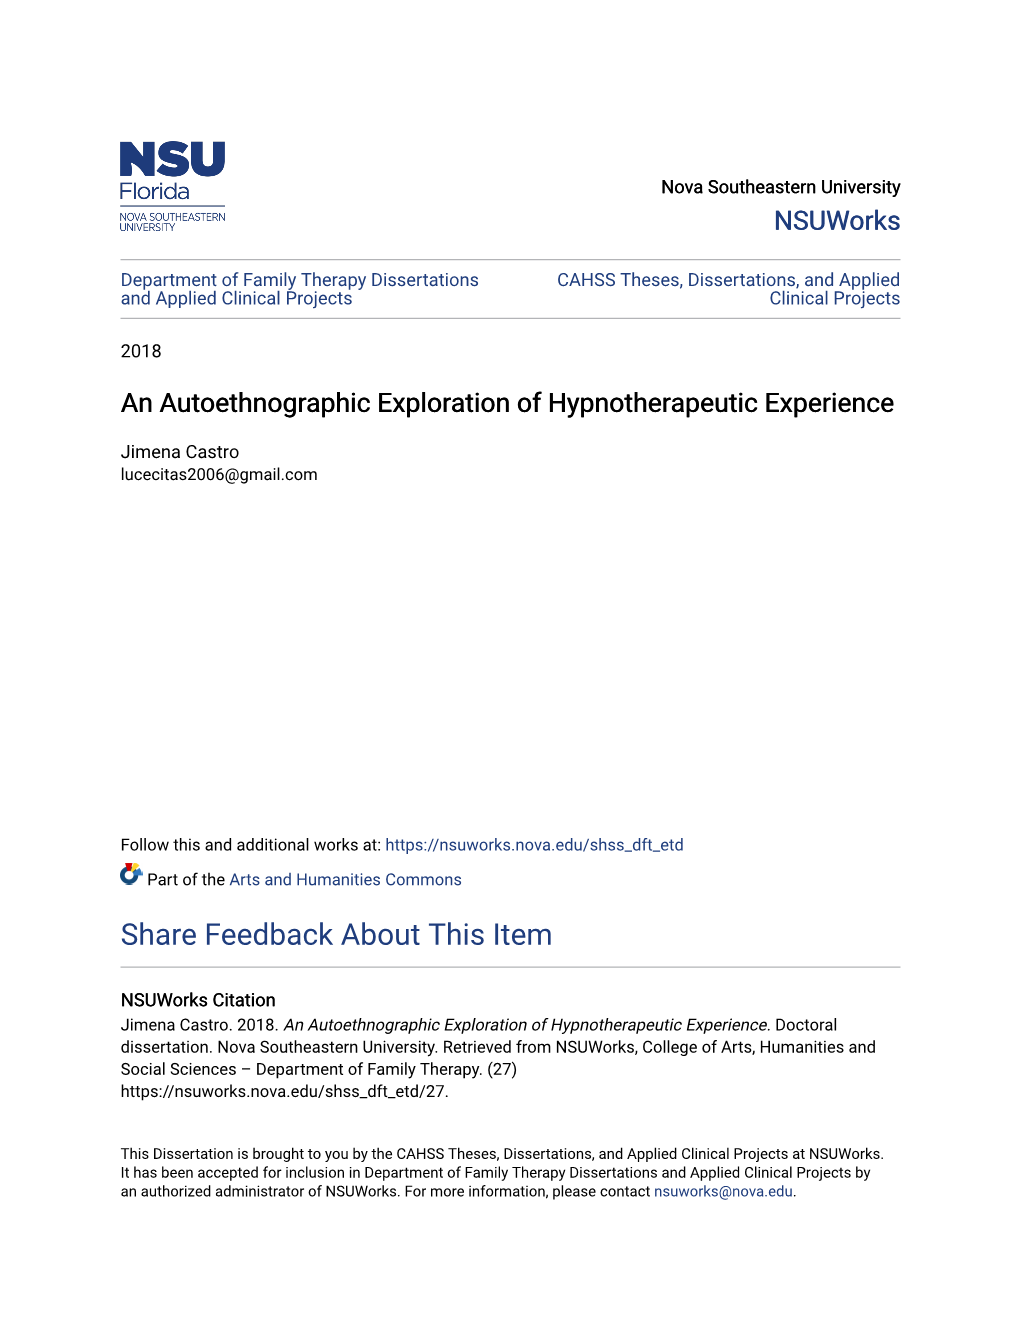 An Autoethnographic Exploration of Hypnotherapeutic Experience